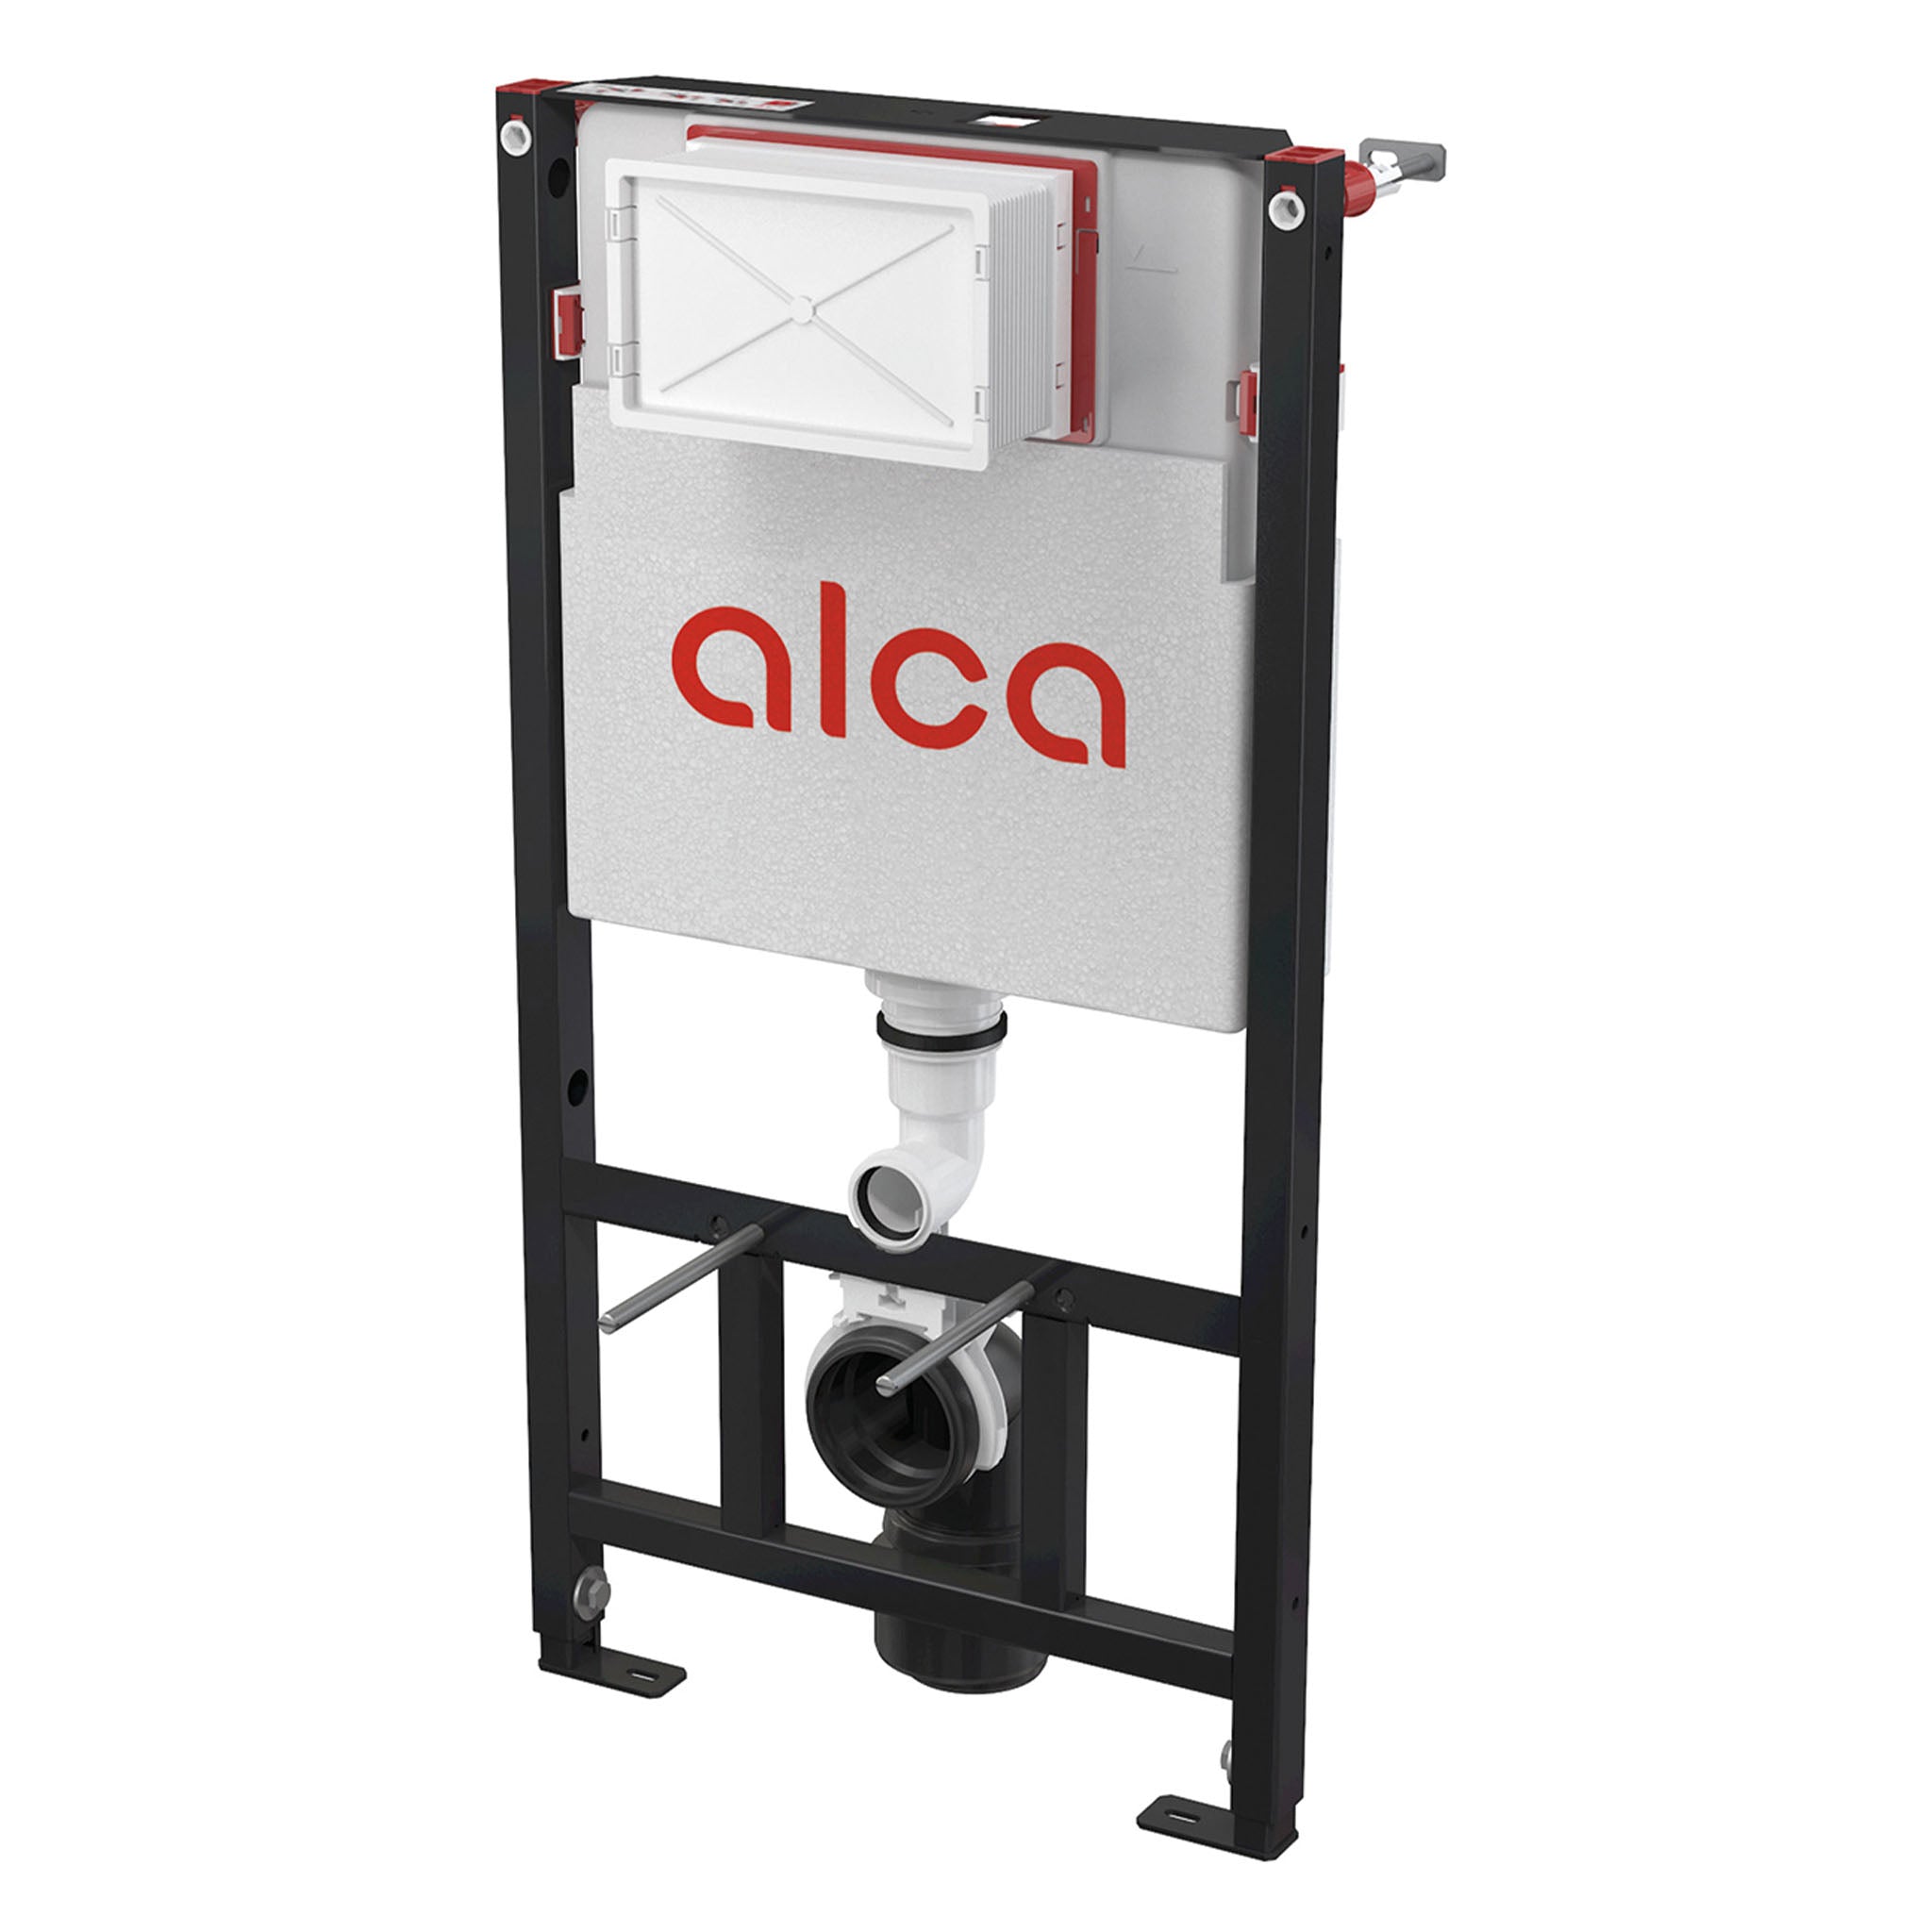 MyStyle Alca 1000mm Wall Mounted Toilet Frame & Concealed Cistern